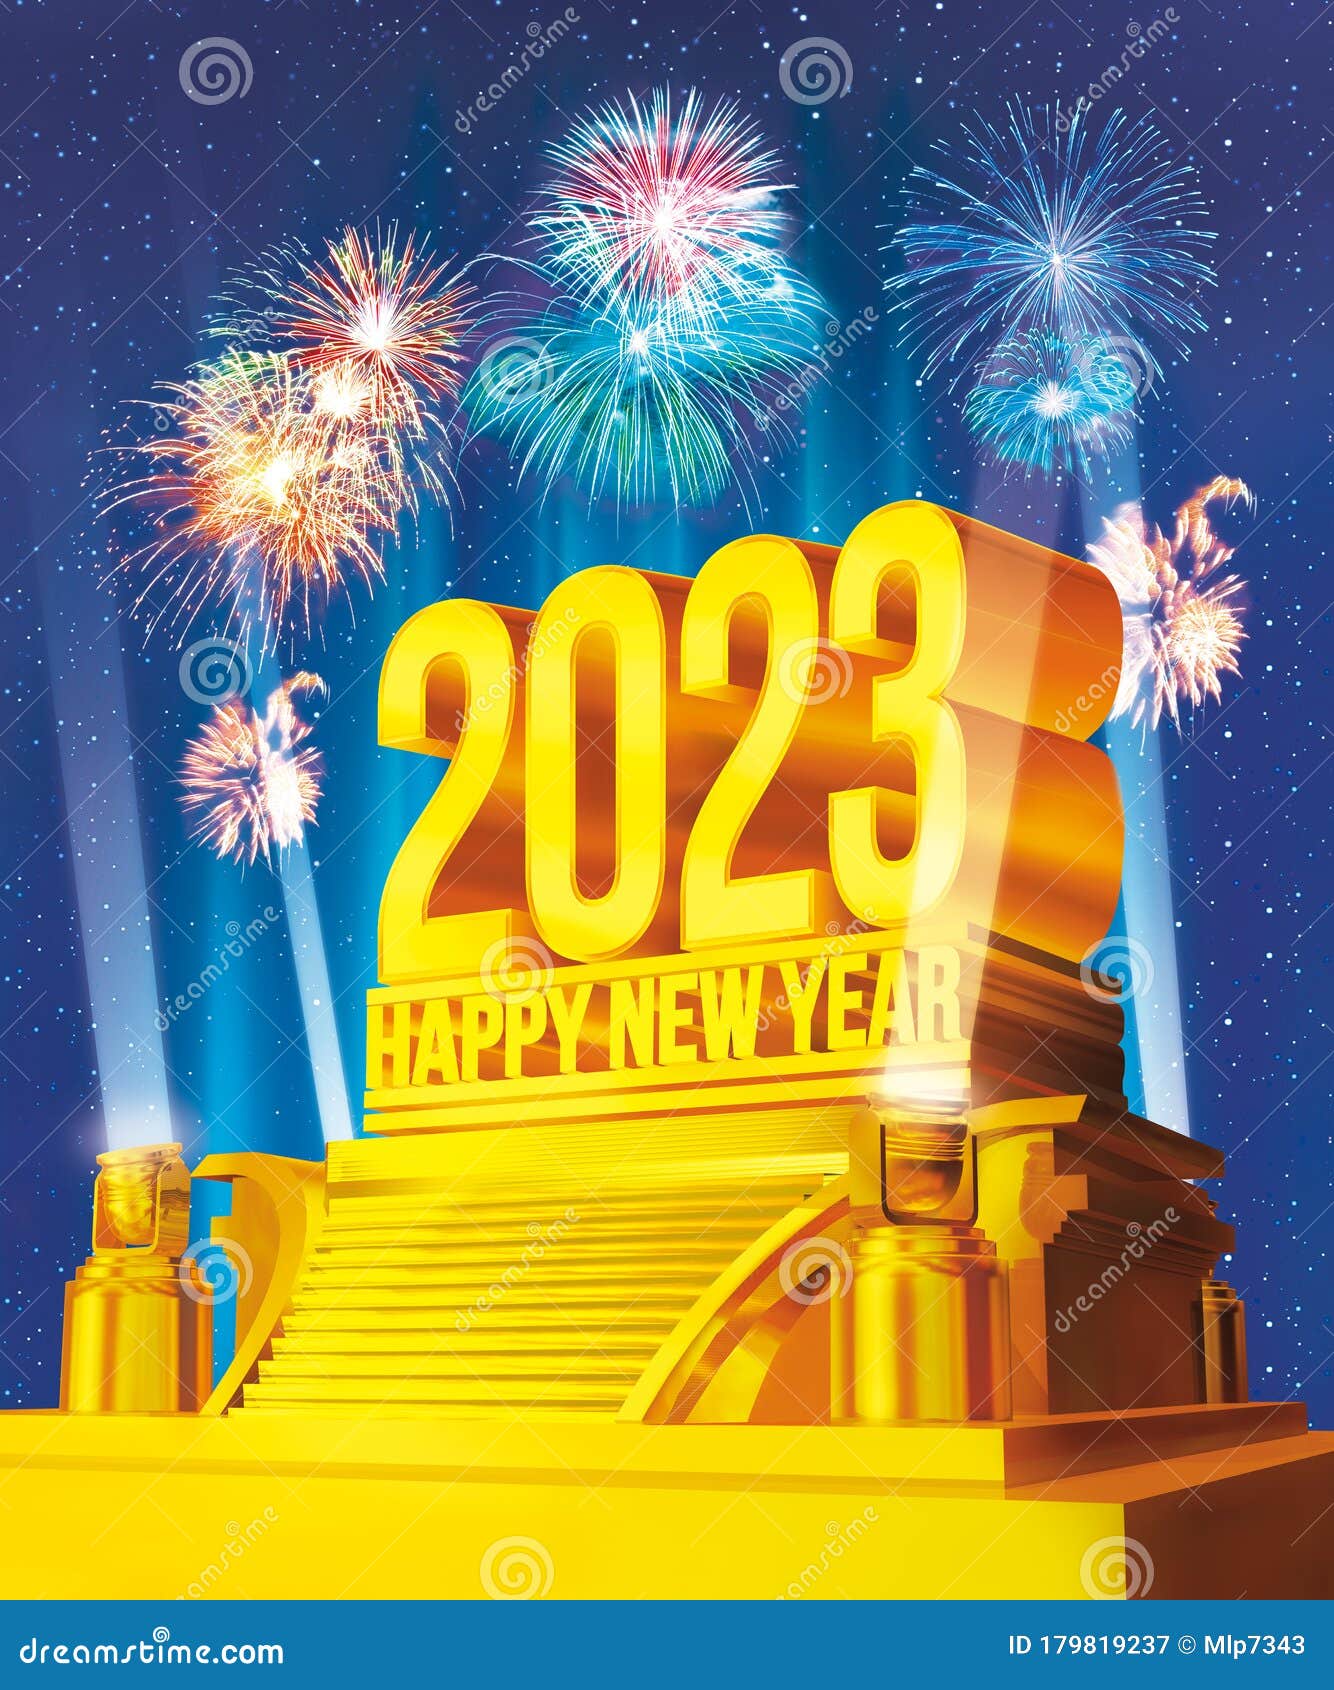 Happy New Year 3d Images 2023 – Get New Year 2023 Update